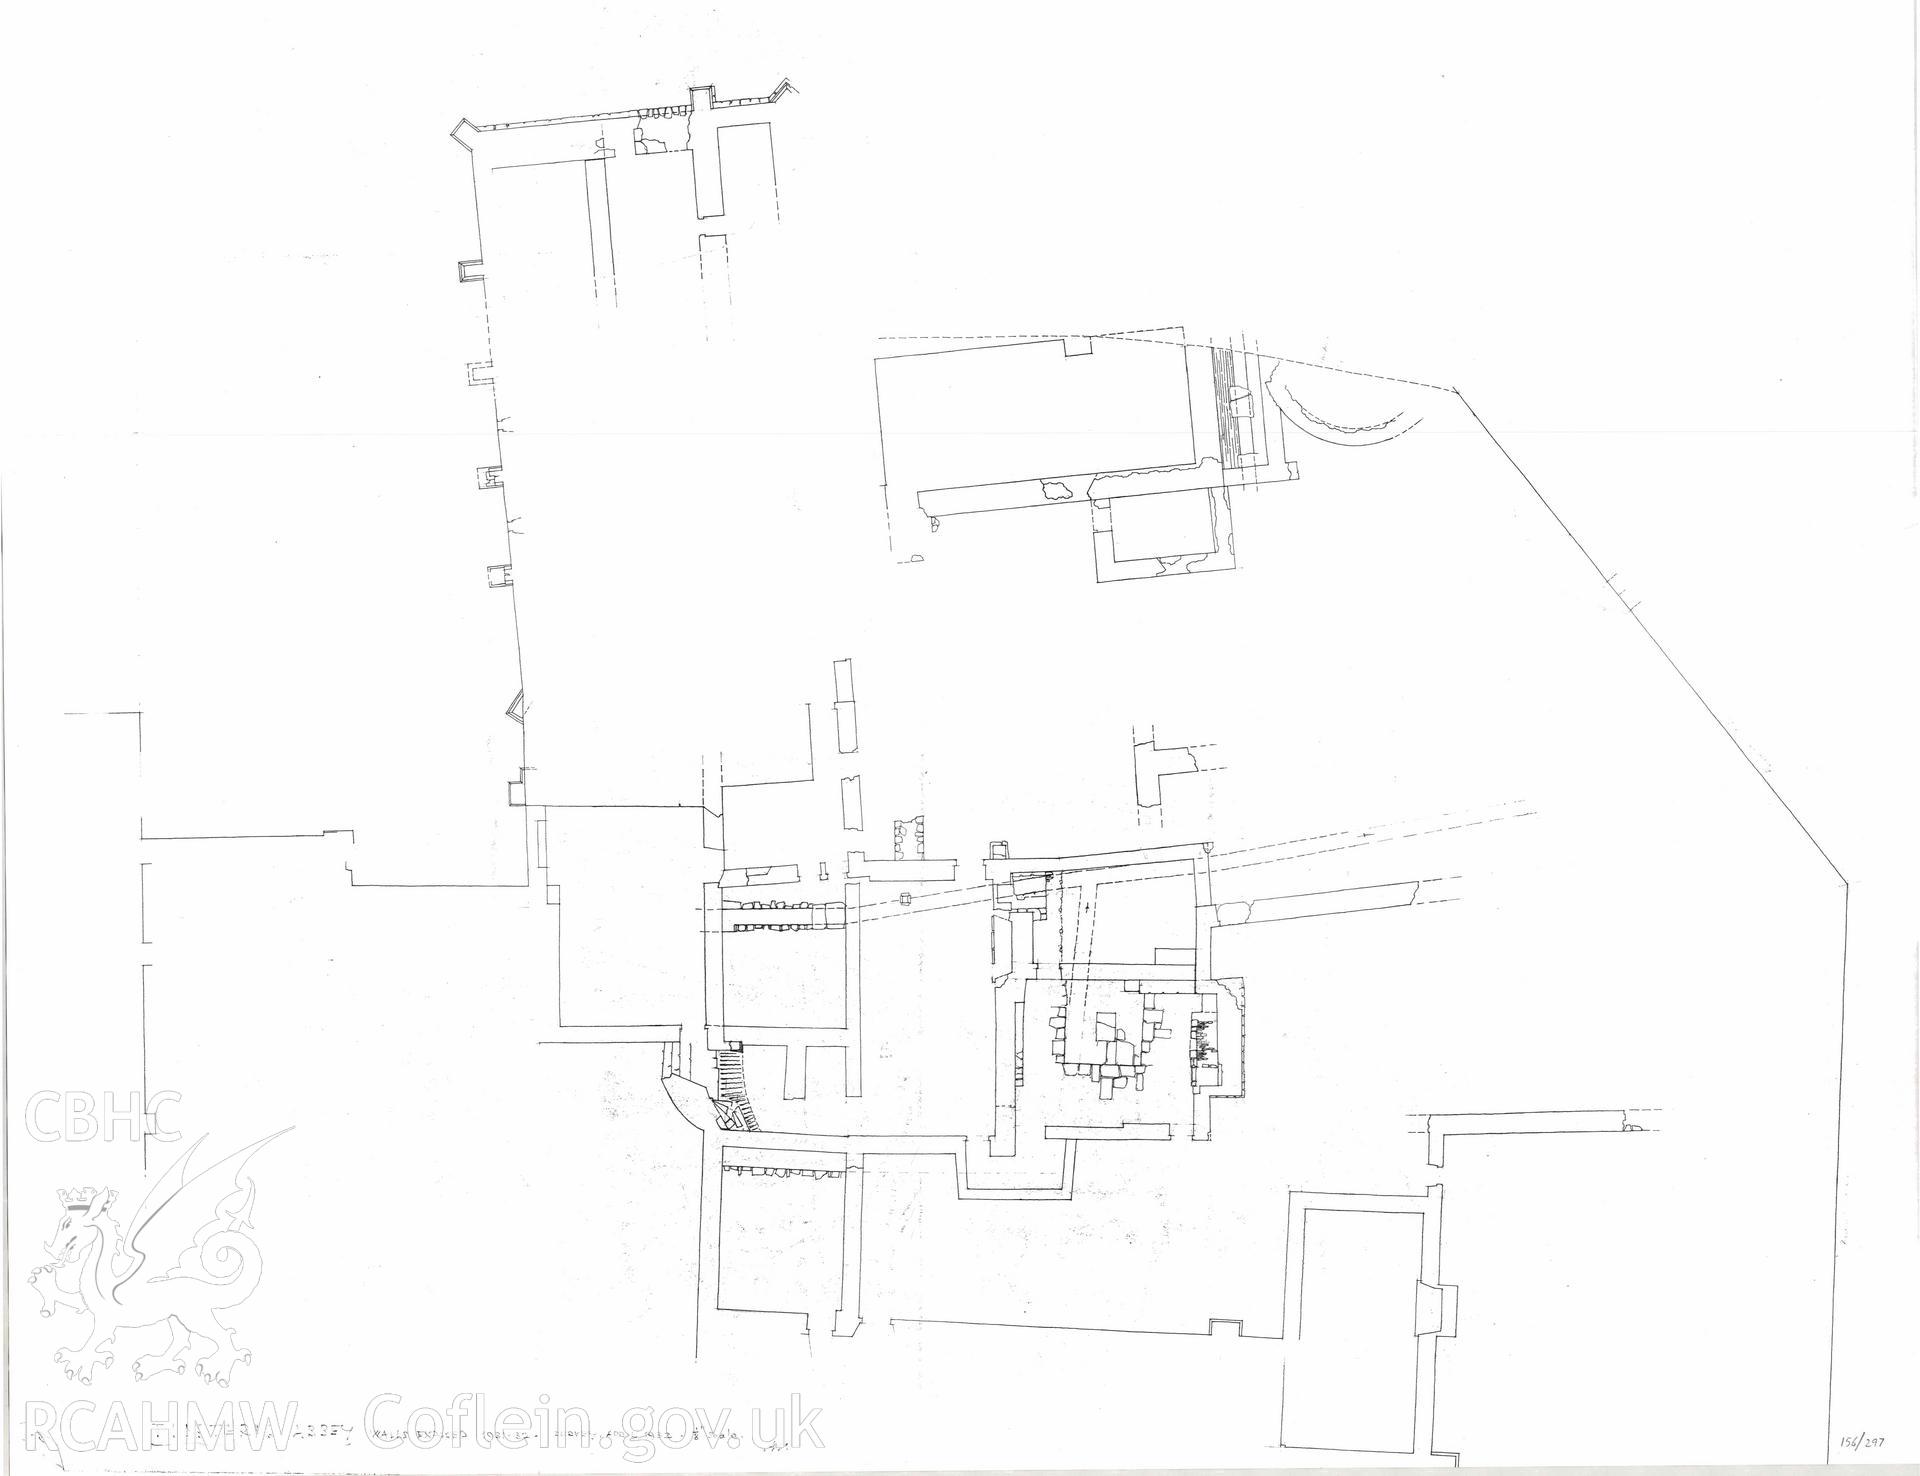 Cadw guardianship monument drawing, copy (part) of original plan of walls etc exposed between 1929-1932, showing wall exposed on Abbot's Hall, camera and chapel over, Tintern Abbey.